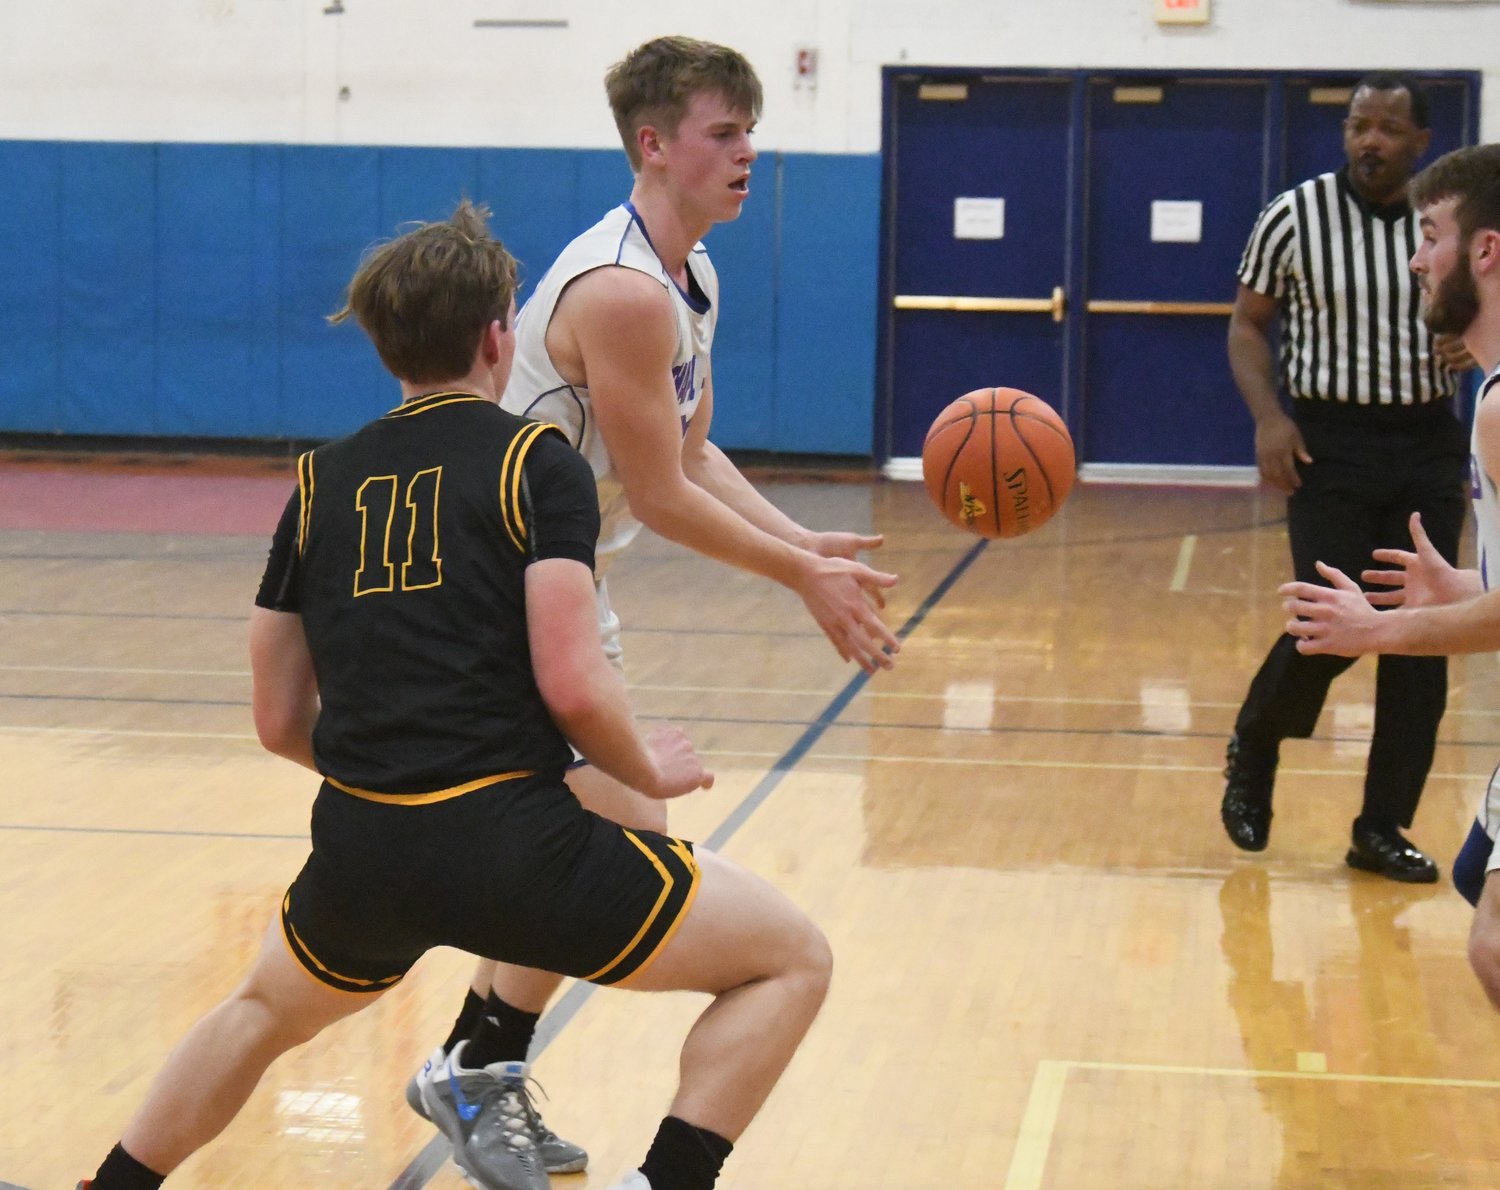 Chapel Field's Jonah McDuffie passes the ball to Mikey Bonagura as Bridgehampton's Dylan Fitzgerald defends during a NYSPHSAA Class D subregional game on March 7 at S.S. Seward Institute in Florida.